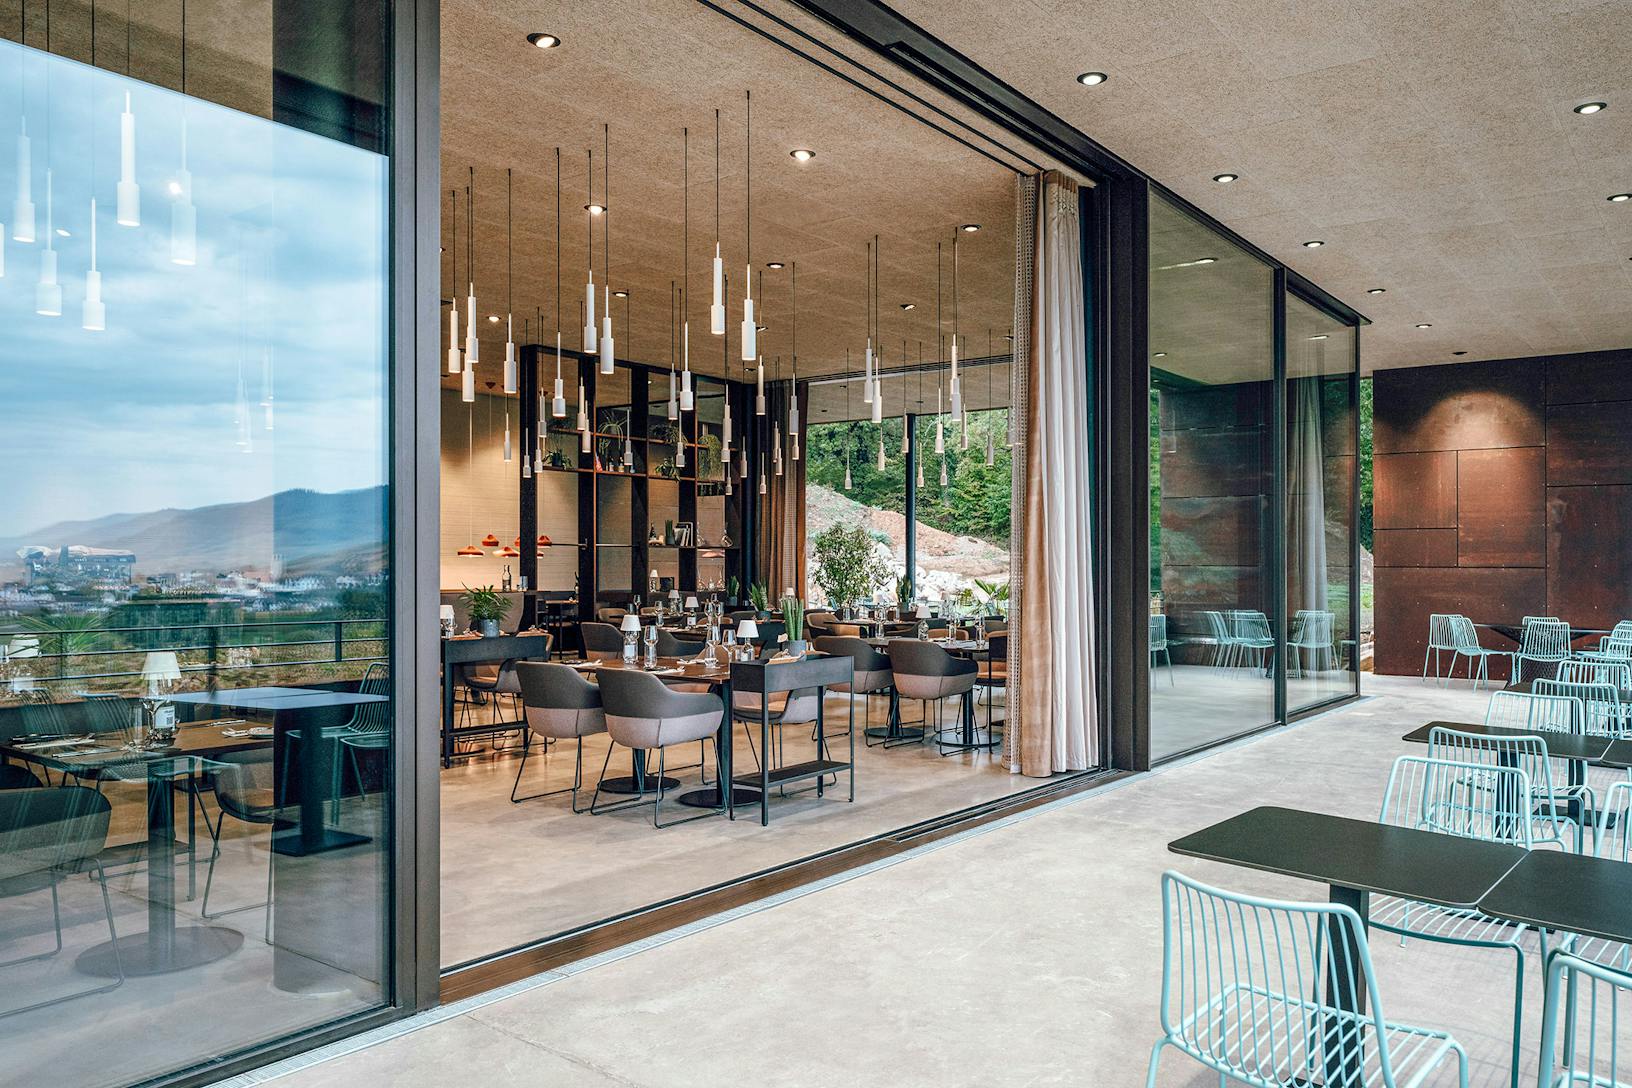 Winery with large glass walls overlooking a mountain